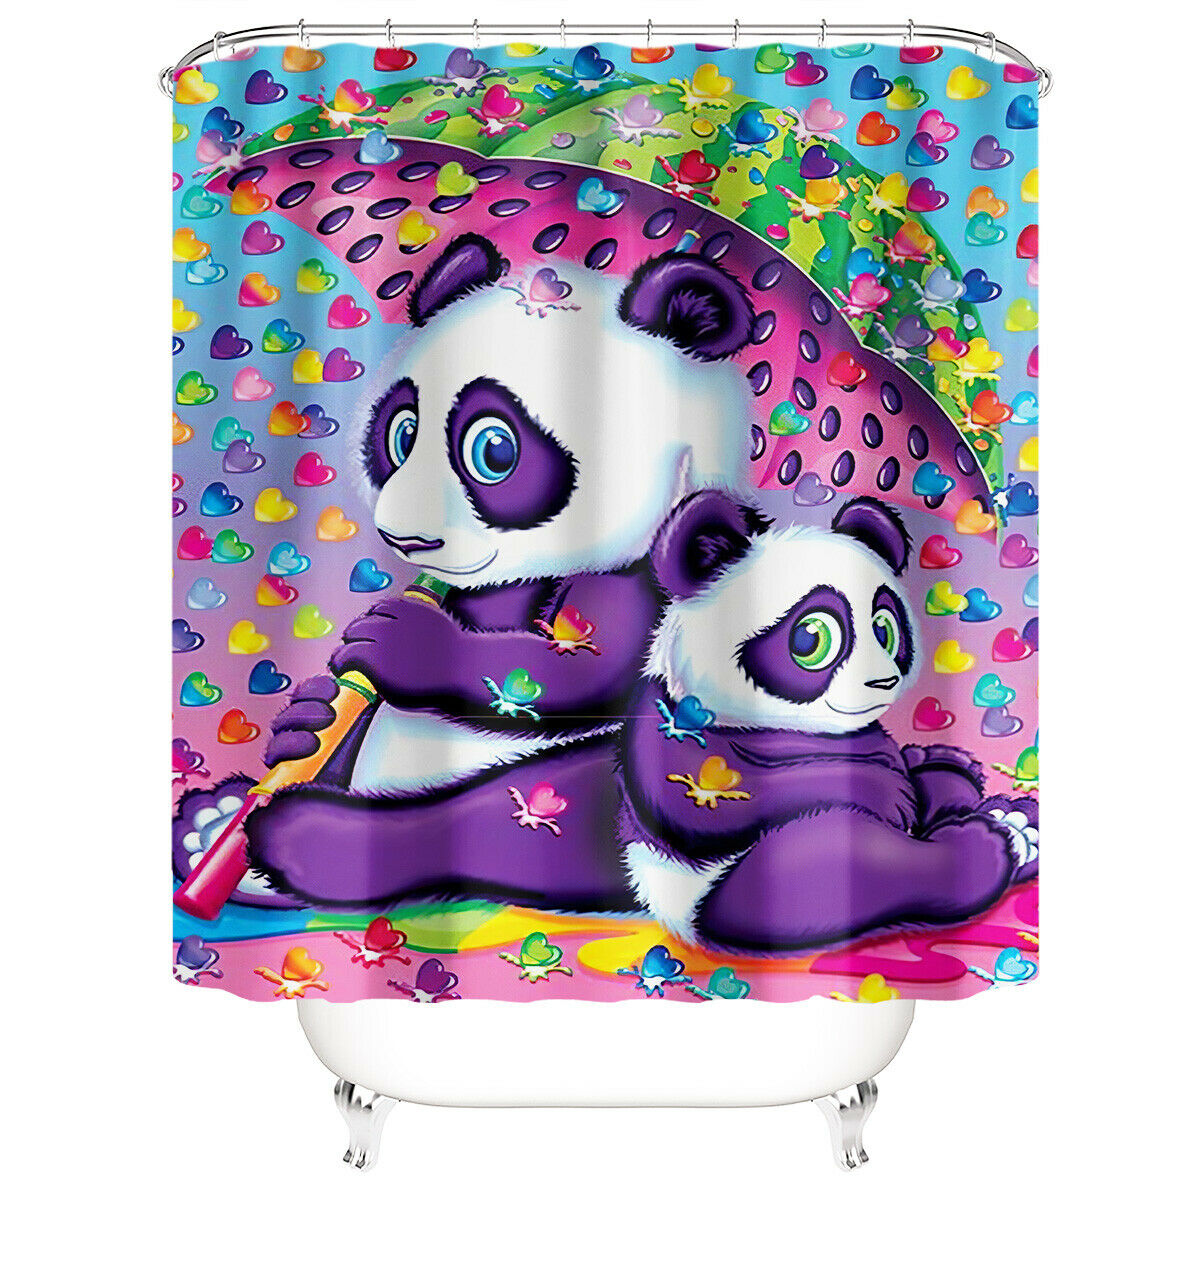 Panda Shower Curtain Bathroom Rug Set Thick Bath Mat Non-Slip Toilet Lid Cover-180×180cm Shower Curtain Only-Free Shipping at meselling99